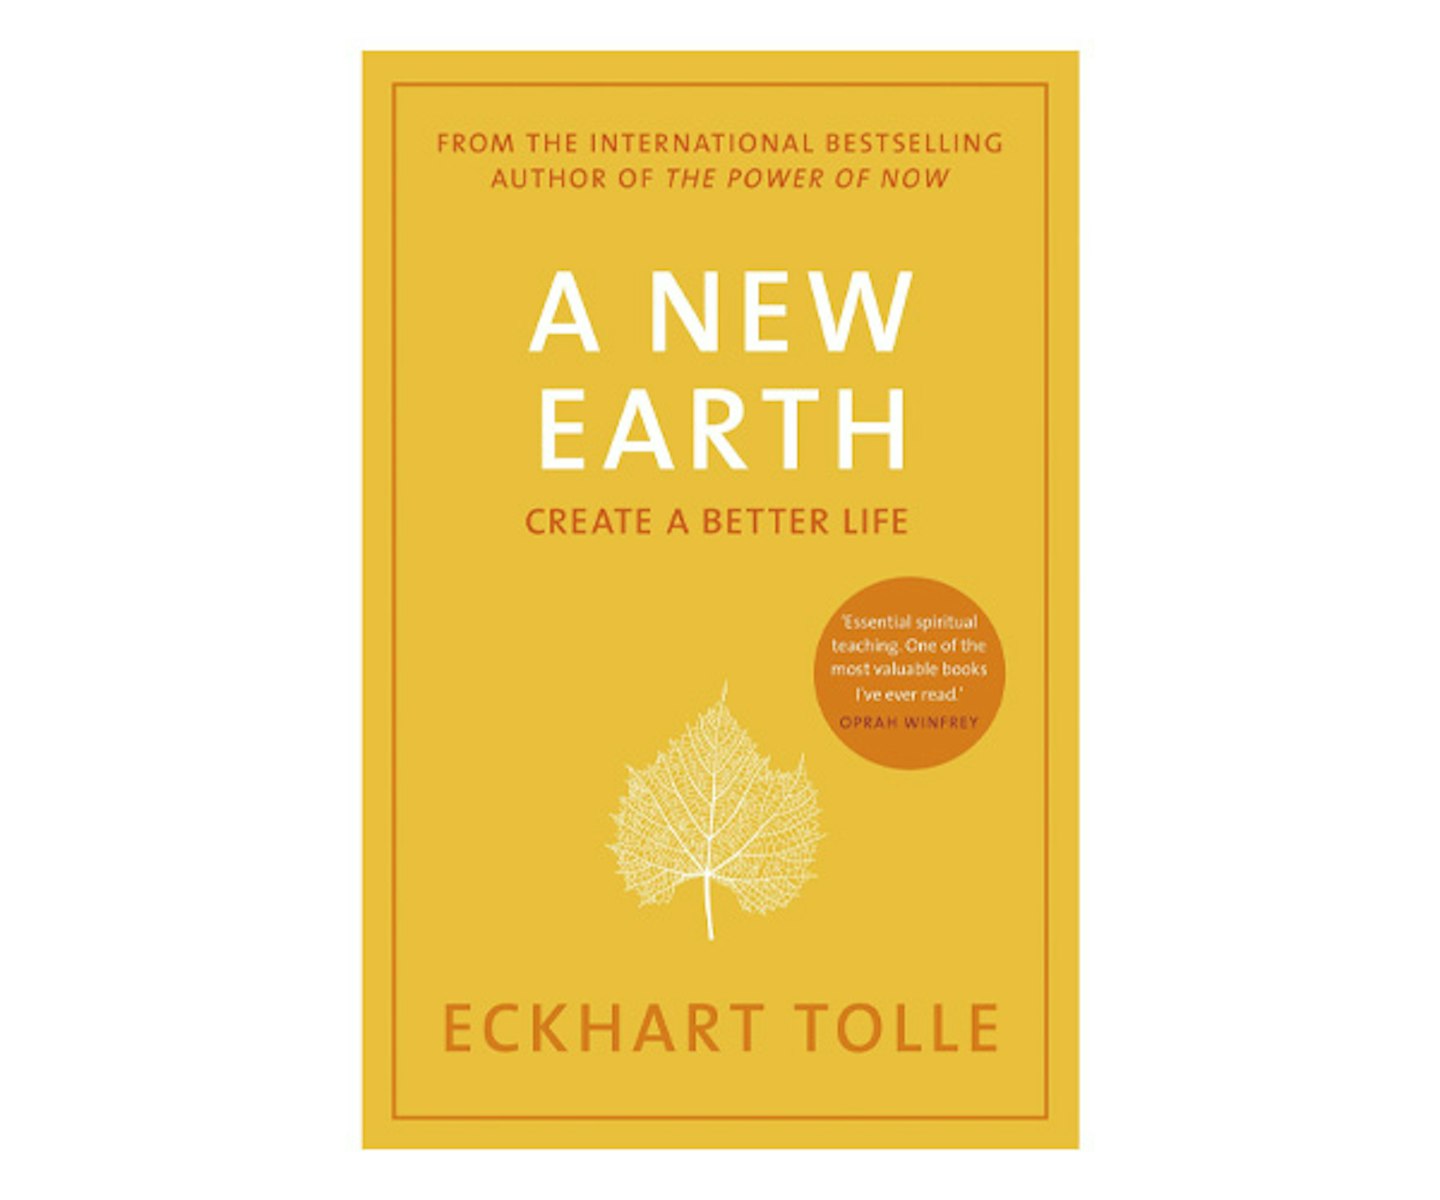 A New Earth: The Life-Changing Follow Up to The Power of Now